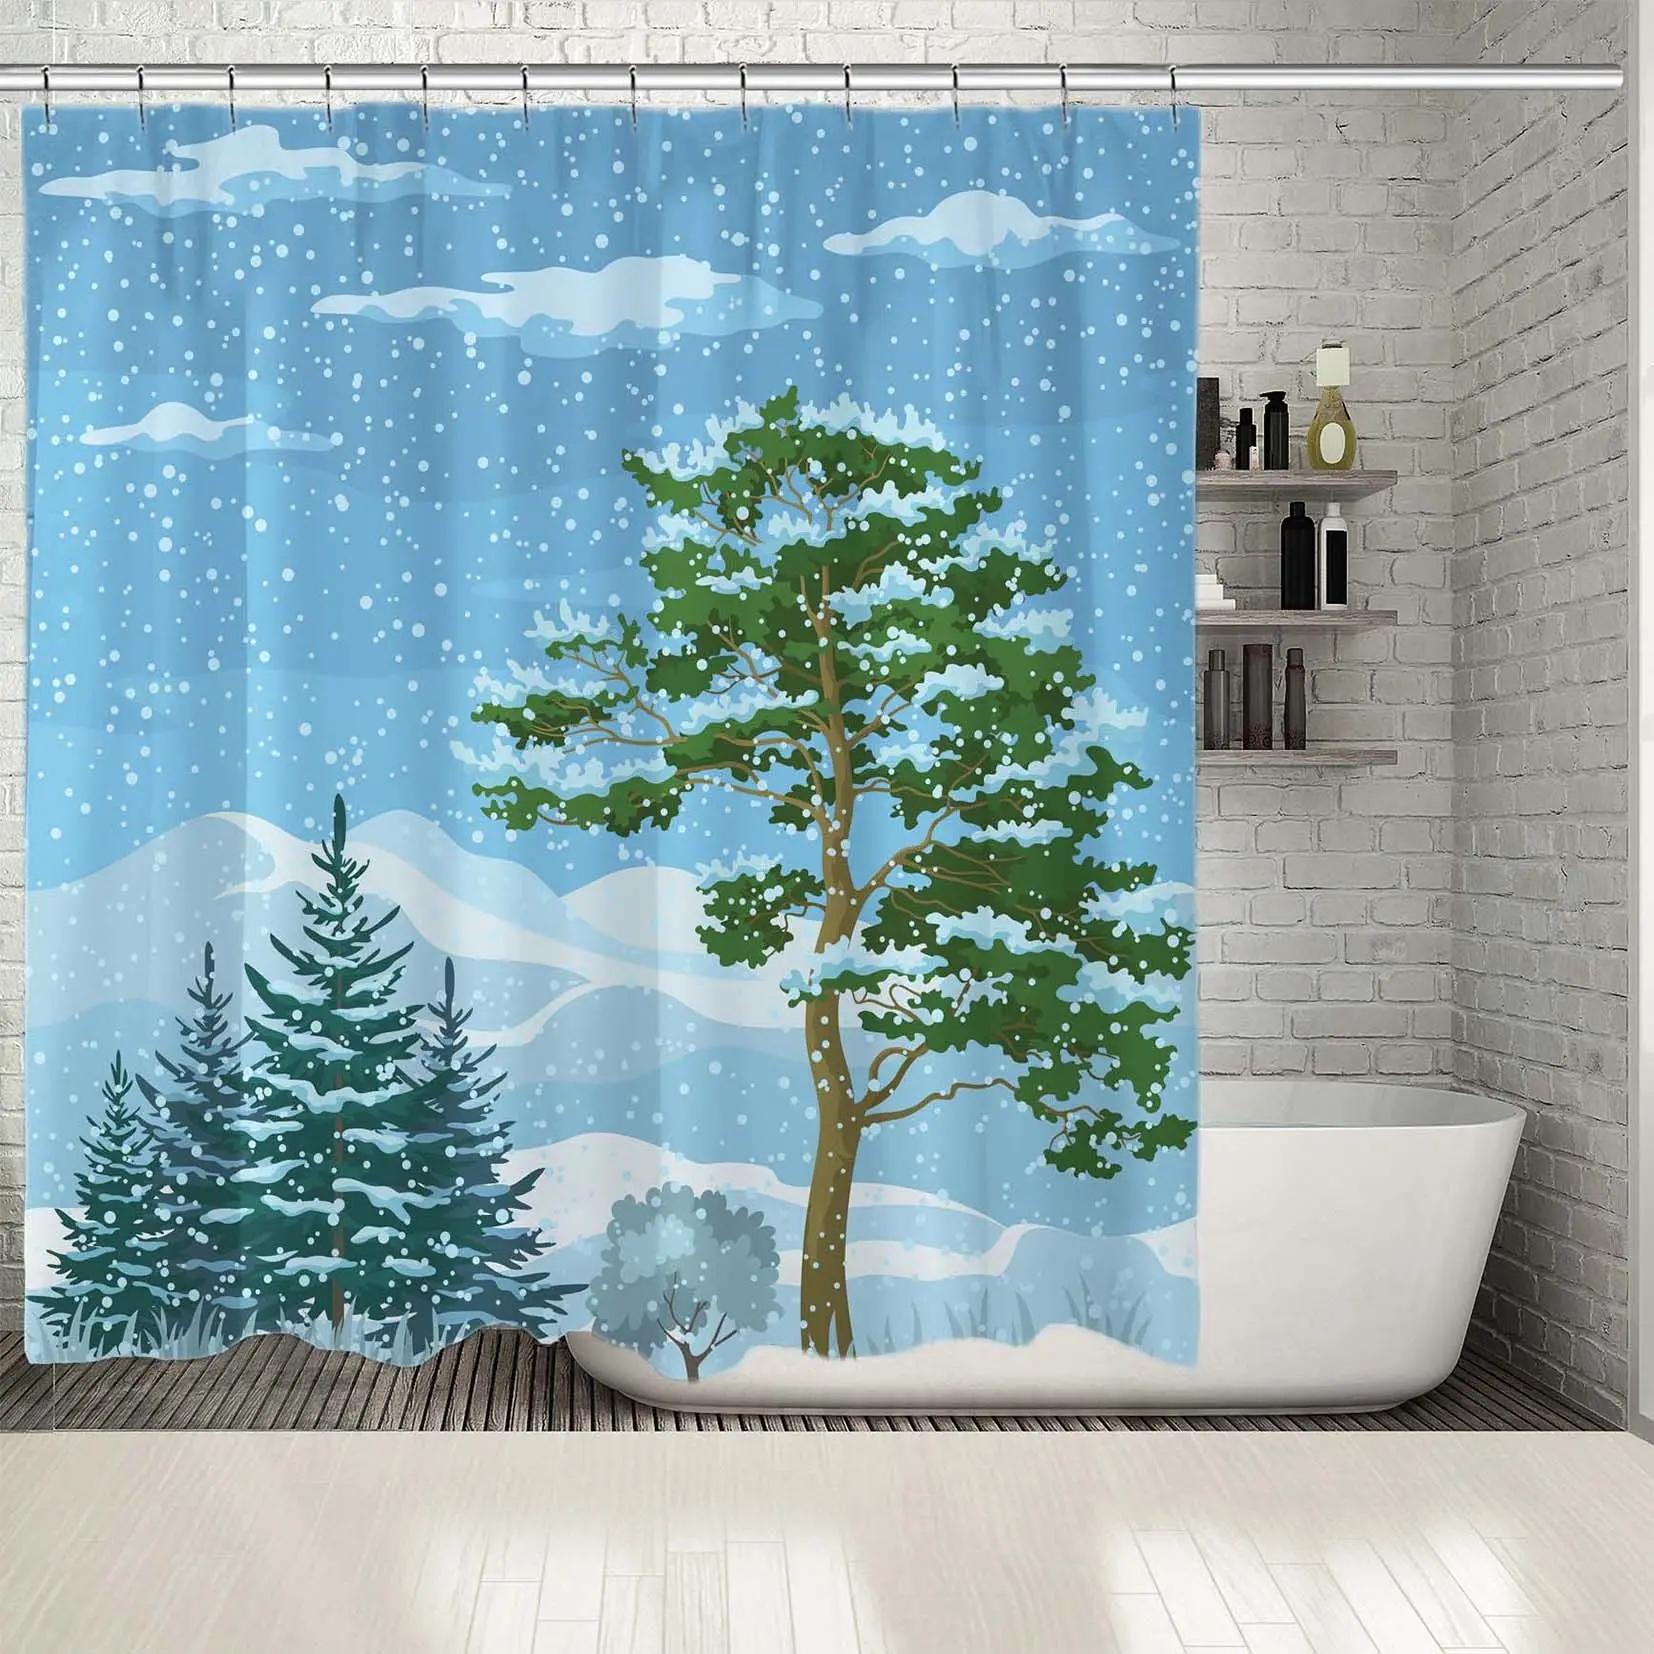 

Shower Curtain Winter Mountain Landscape with Pine Trees Firs Green Grass and Blue Sky with Snow and Clouds Printed